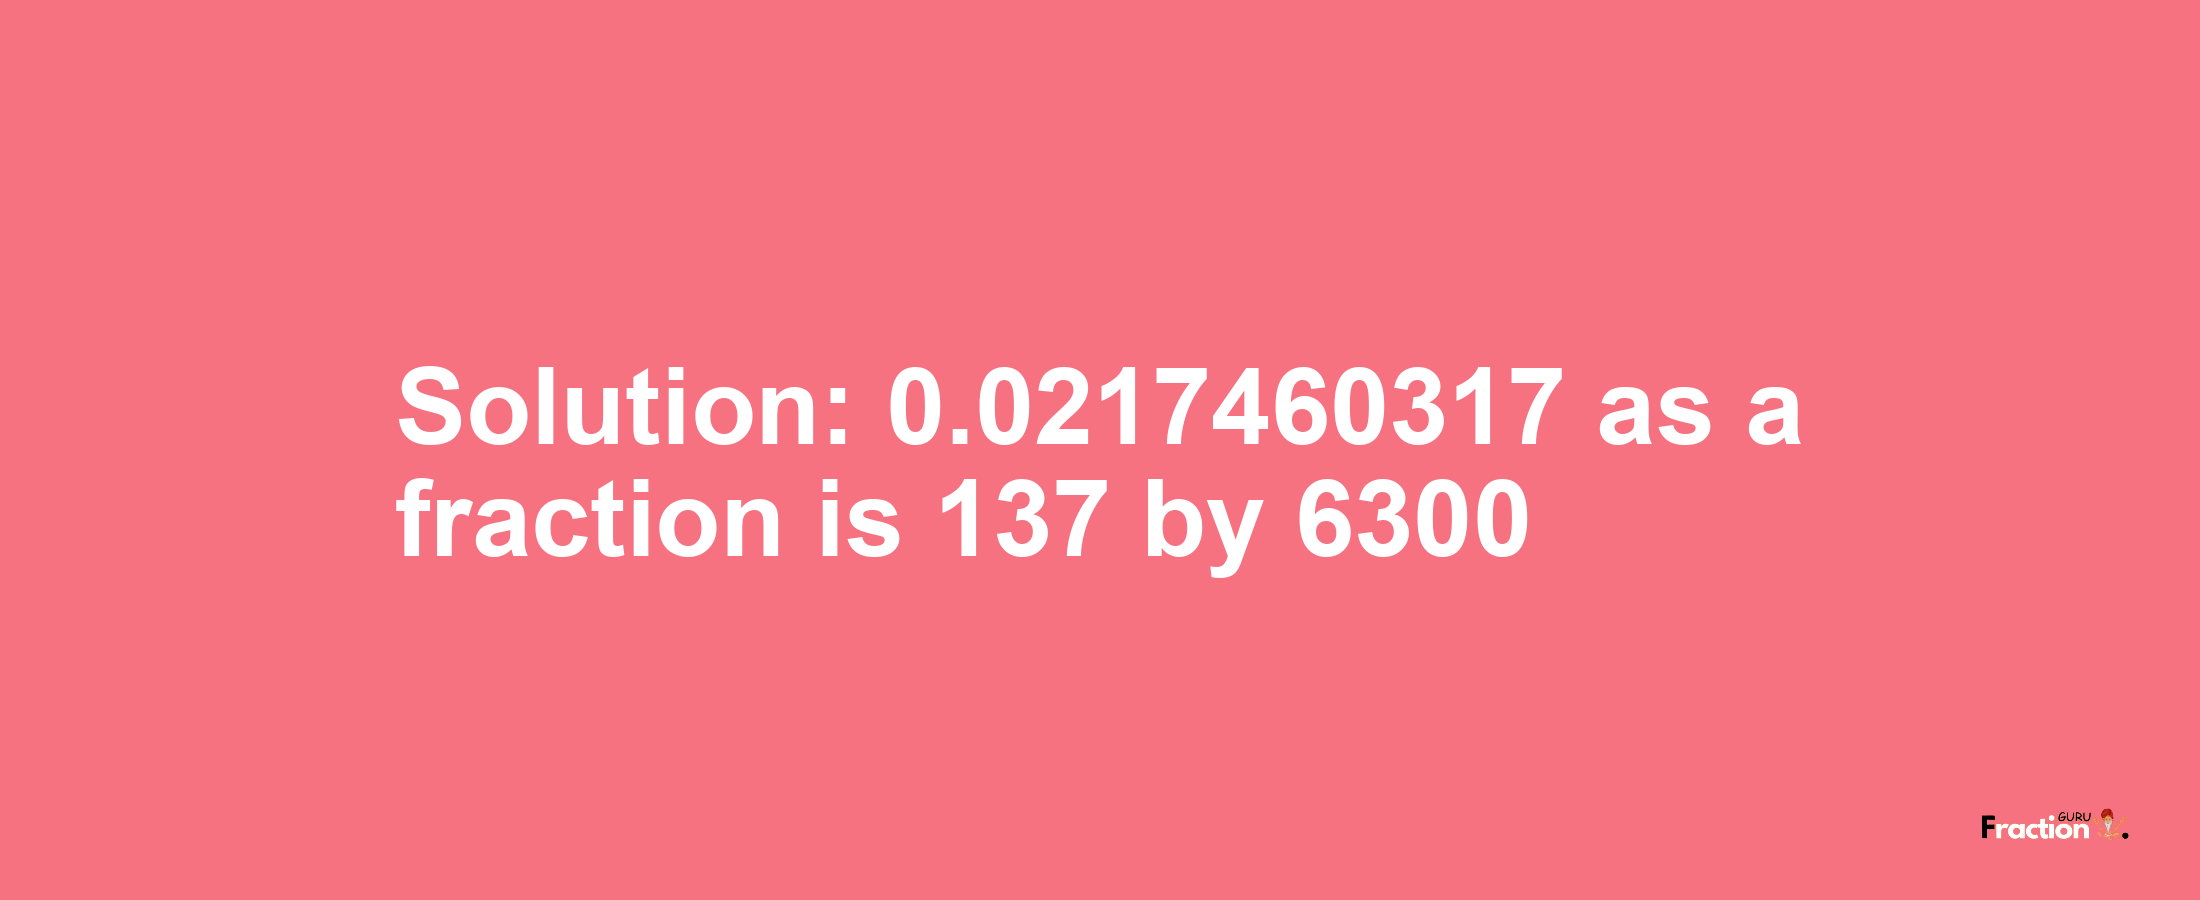 Solution:0.0217460317 as a fraction is 137/6300